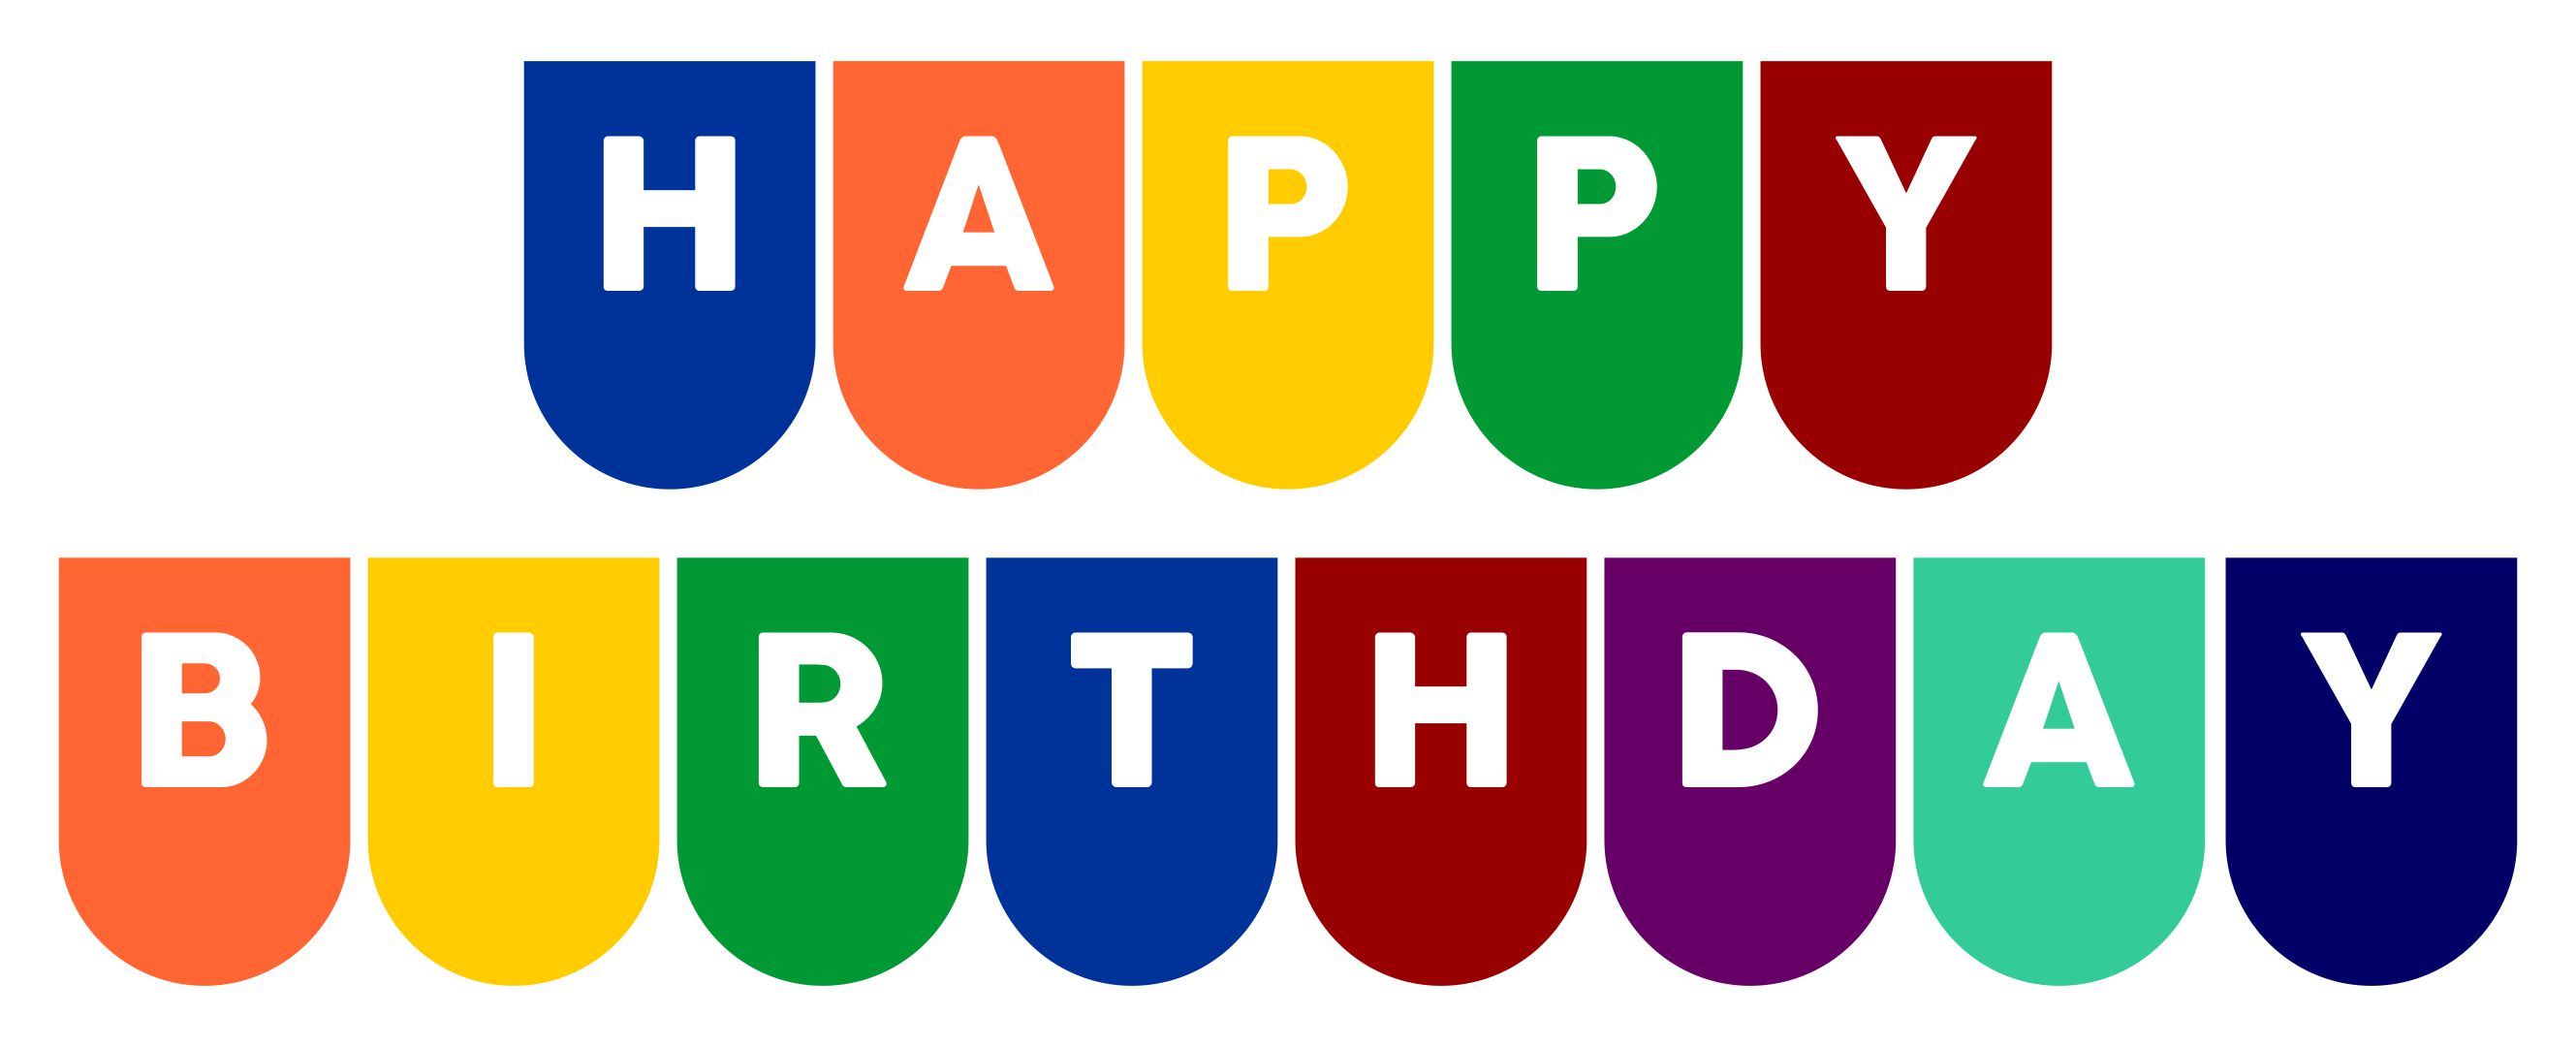 6-best-images-of-happy-birthday-printable-banners-signs-free